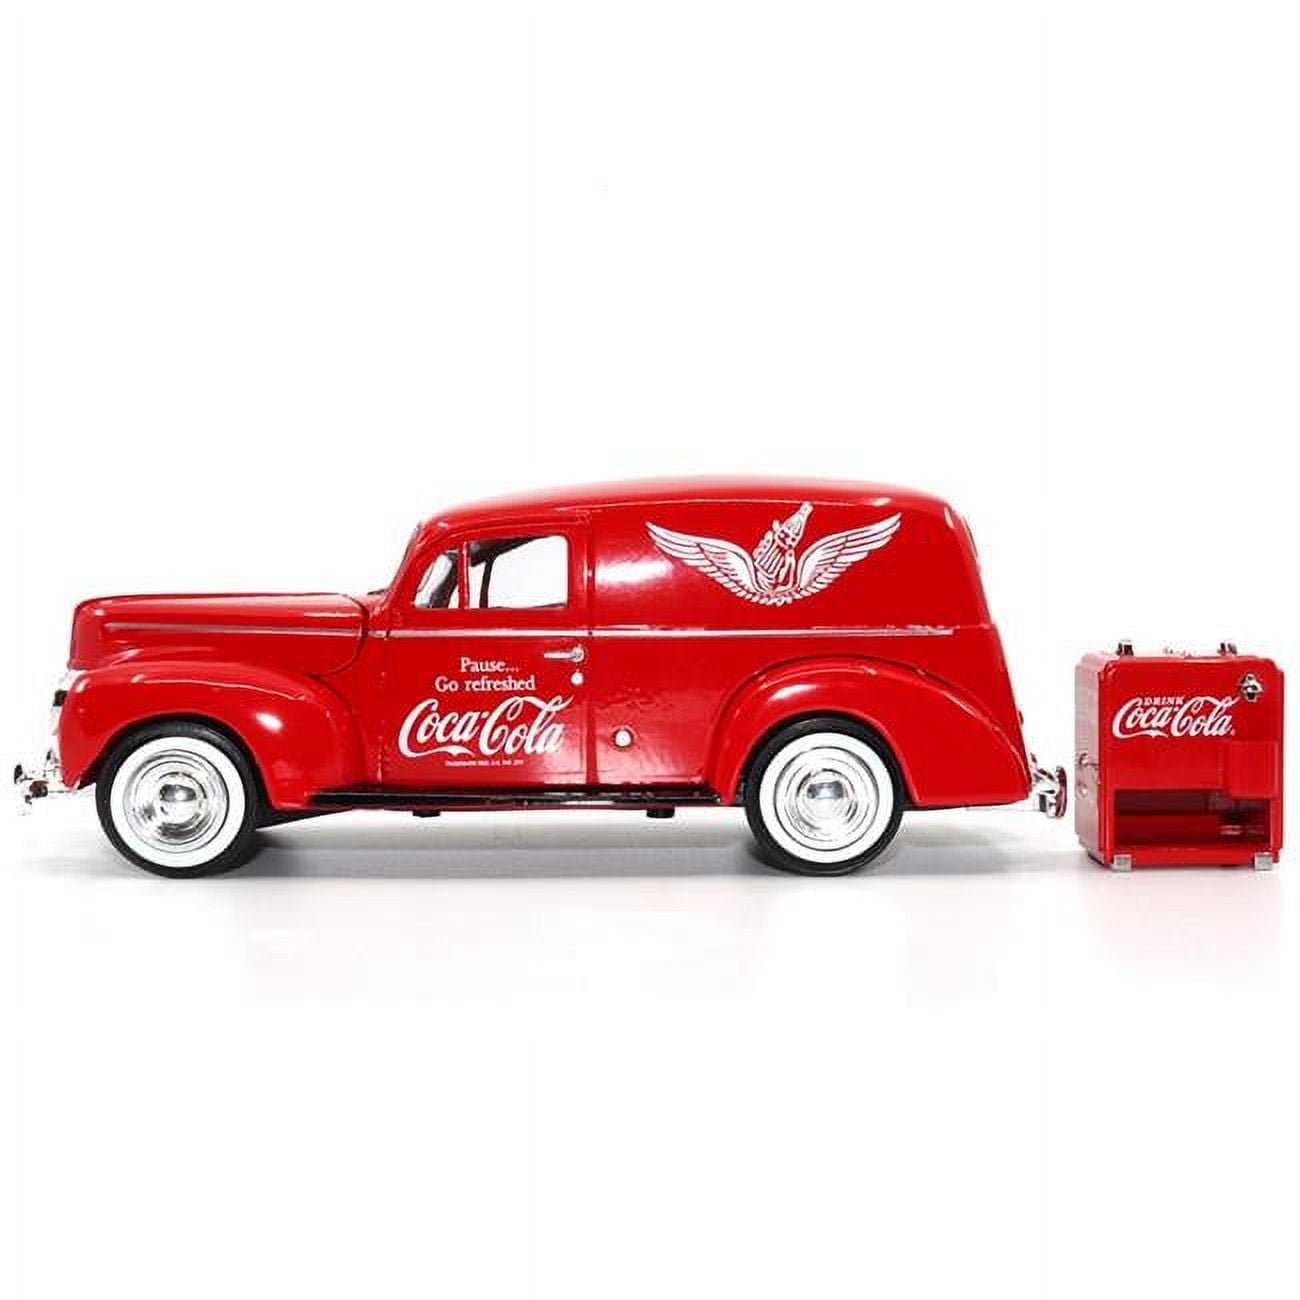 Motorcity Classics 424195 1940 Ford Sedan Cargo Van Red Pause Go Refreshed Coca-Cola with Vending Machine Accessory 1-24 Diecast Model Car -  MOTOR CITY CLASSICS